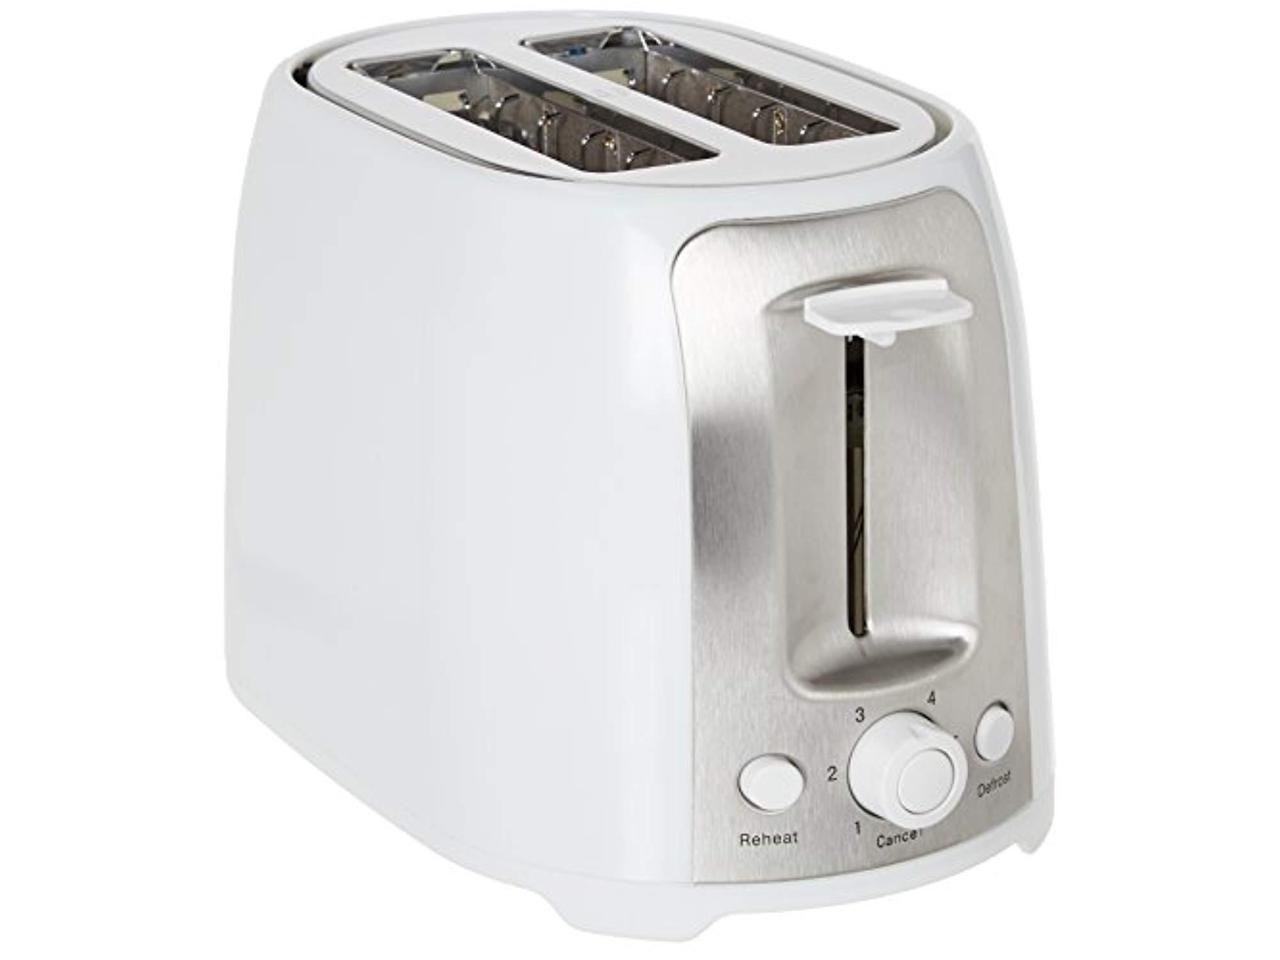 GreatBuy Pioneer Woman Extra-Wide Slot 2 Slice Toaster Fiona Floral 